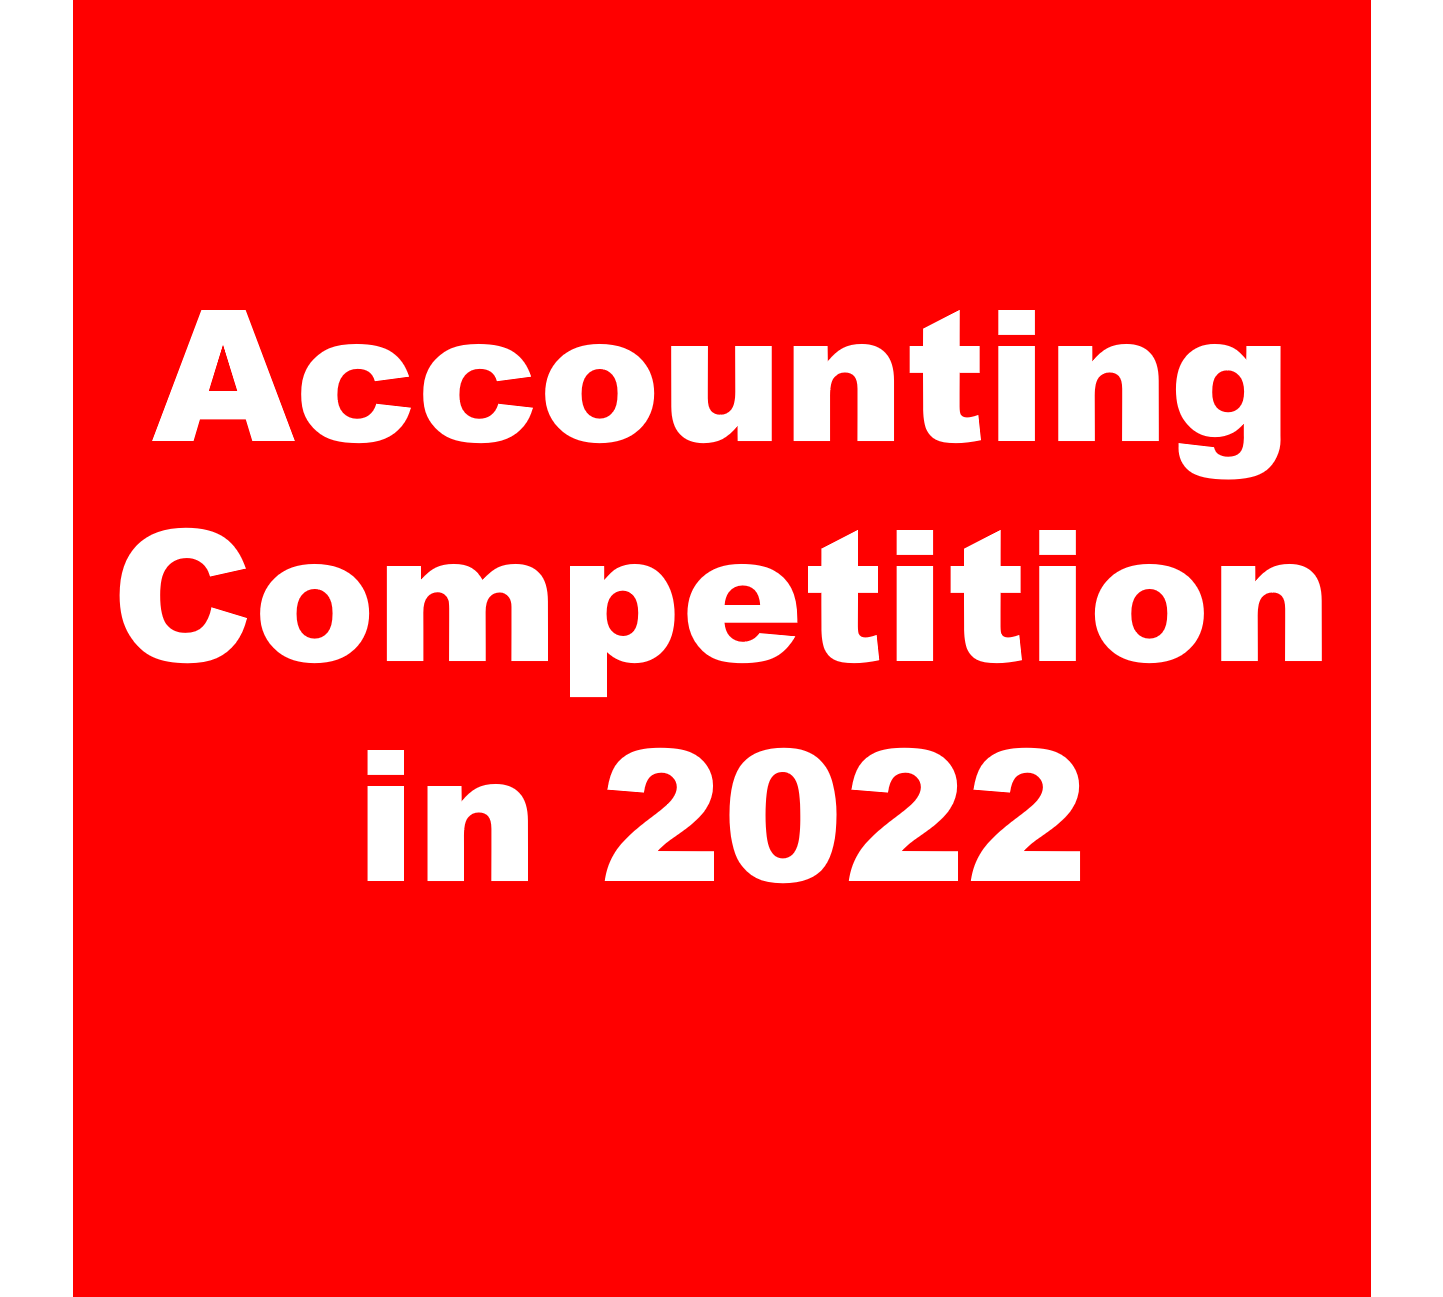 Accounting Competition in 2022